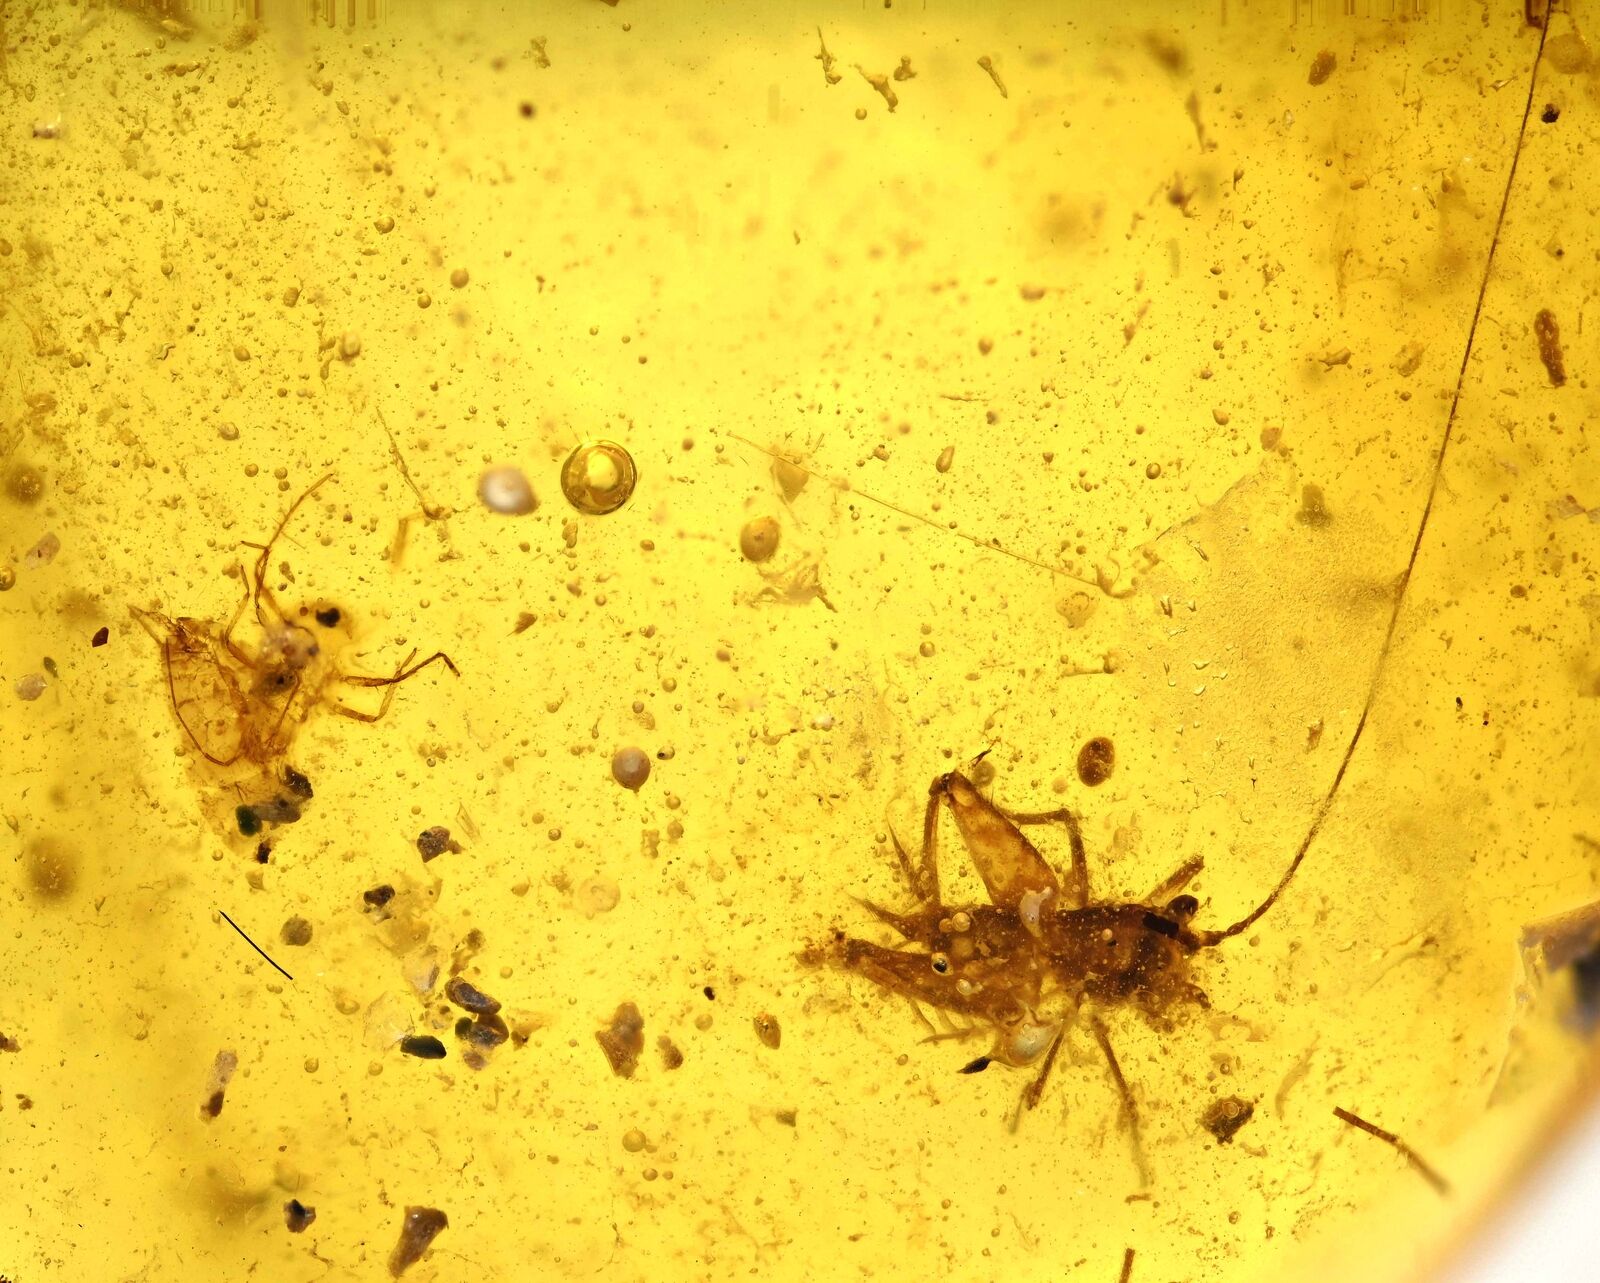 Orthoptera (Cricket), Fossil inclusion in Burmese Amber